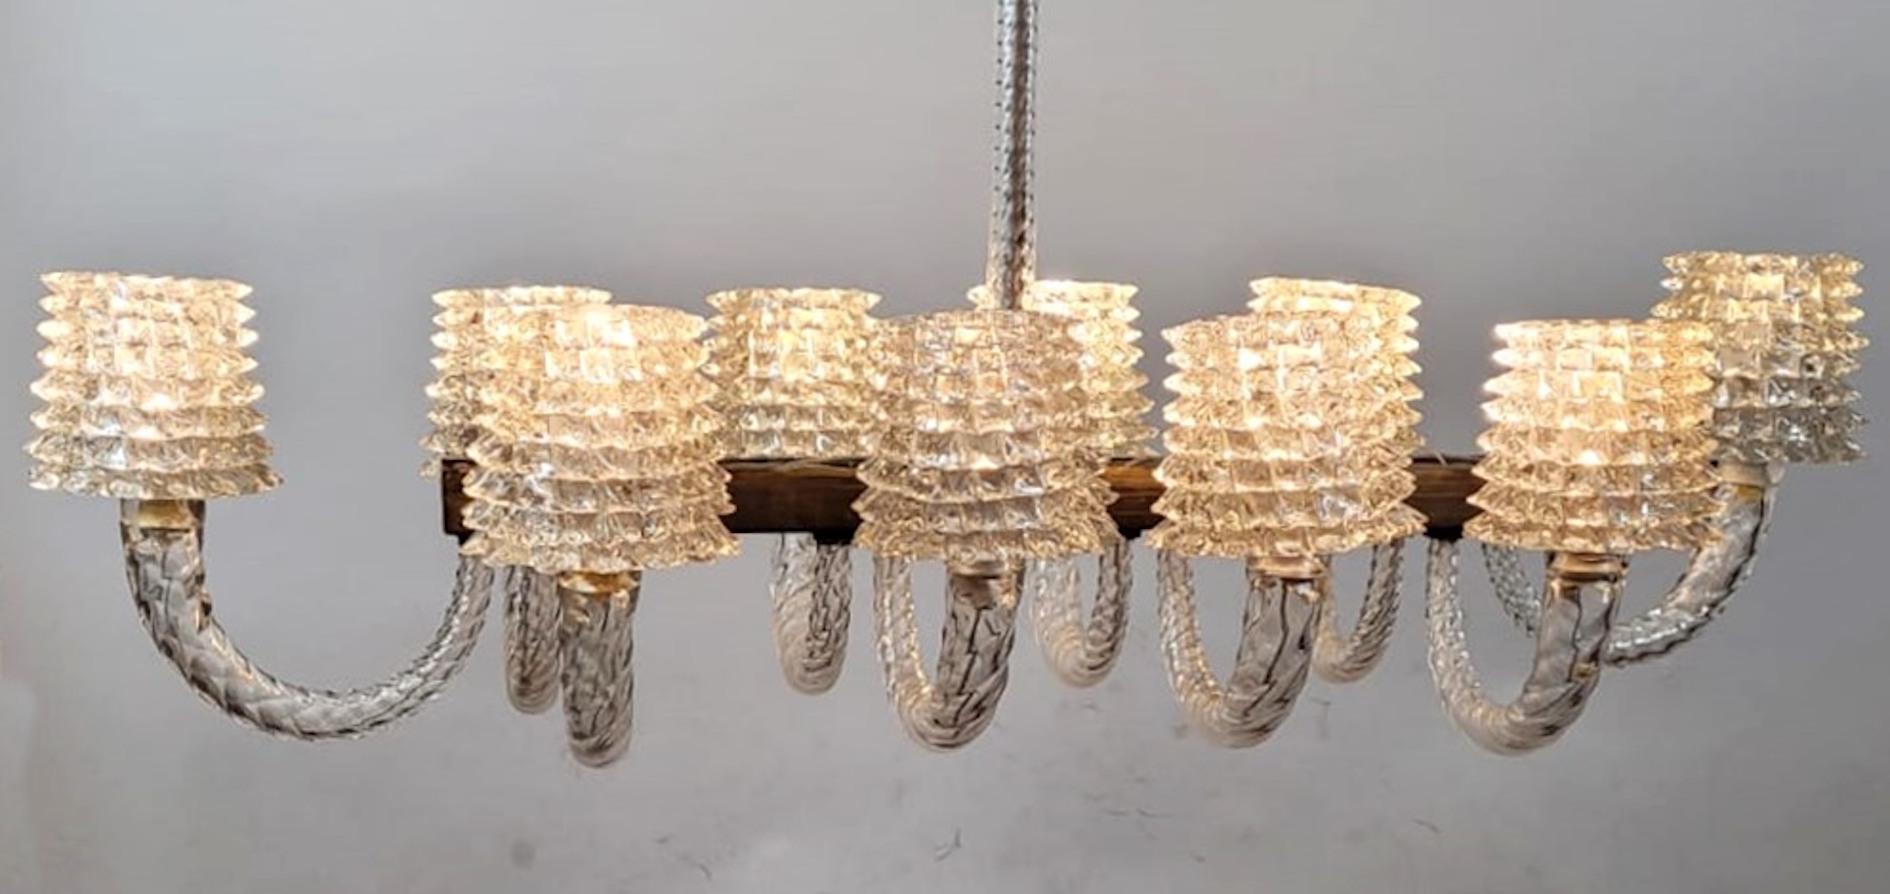 Large Barovier And Toso Chandelier - Murano - 10 Sconces For Sale 3